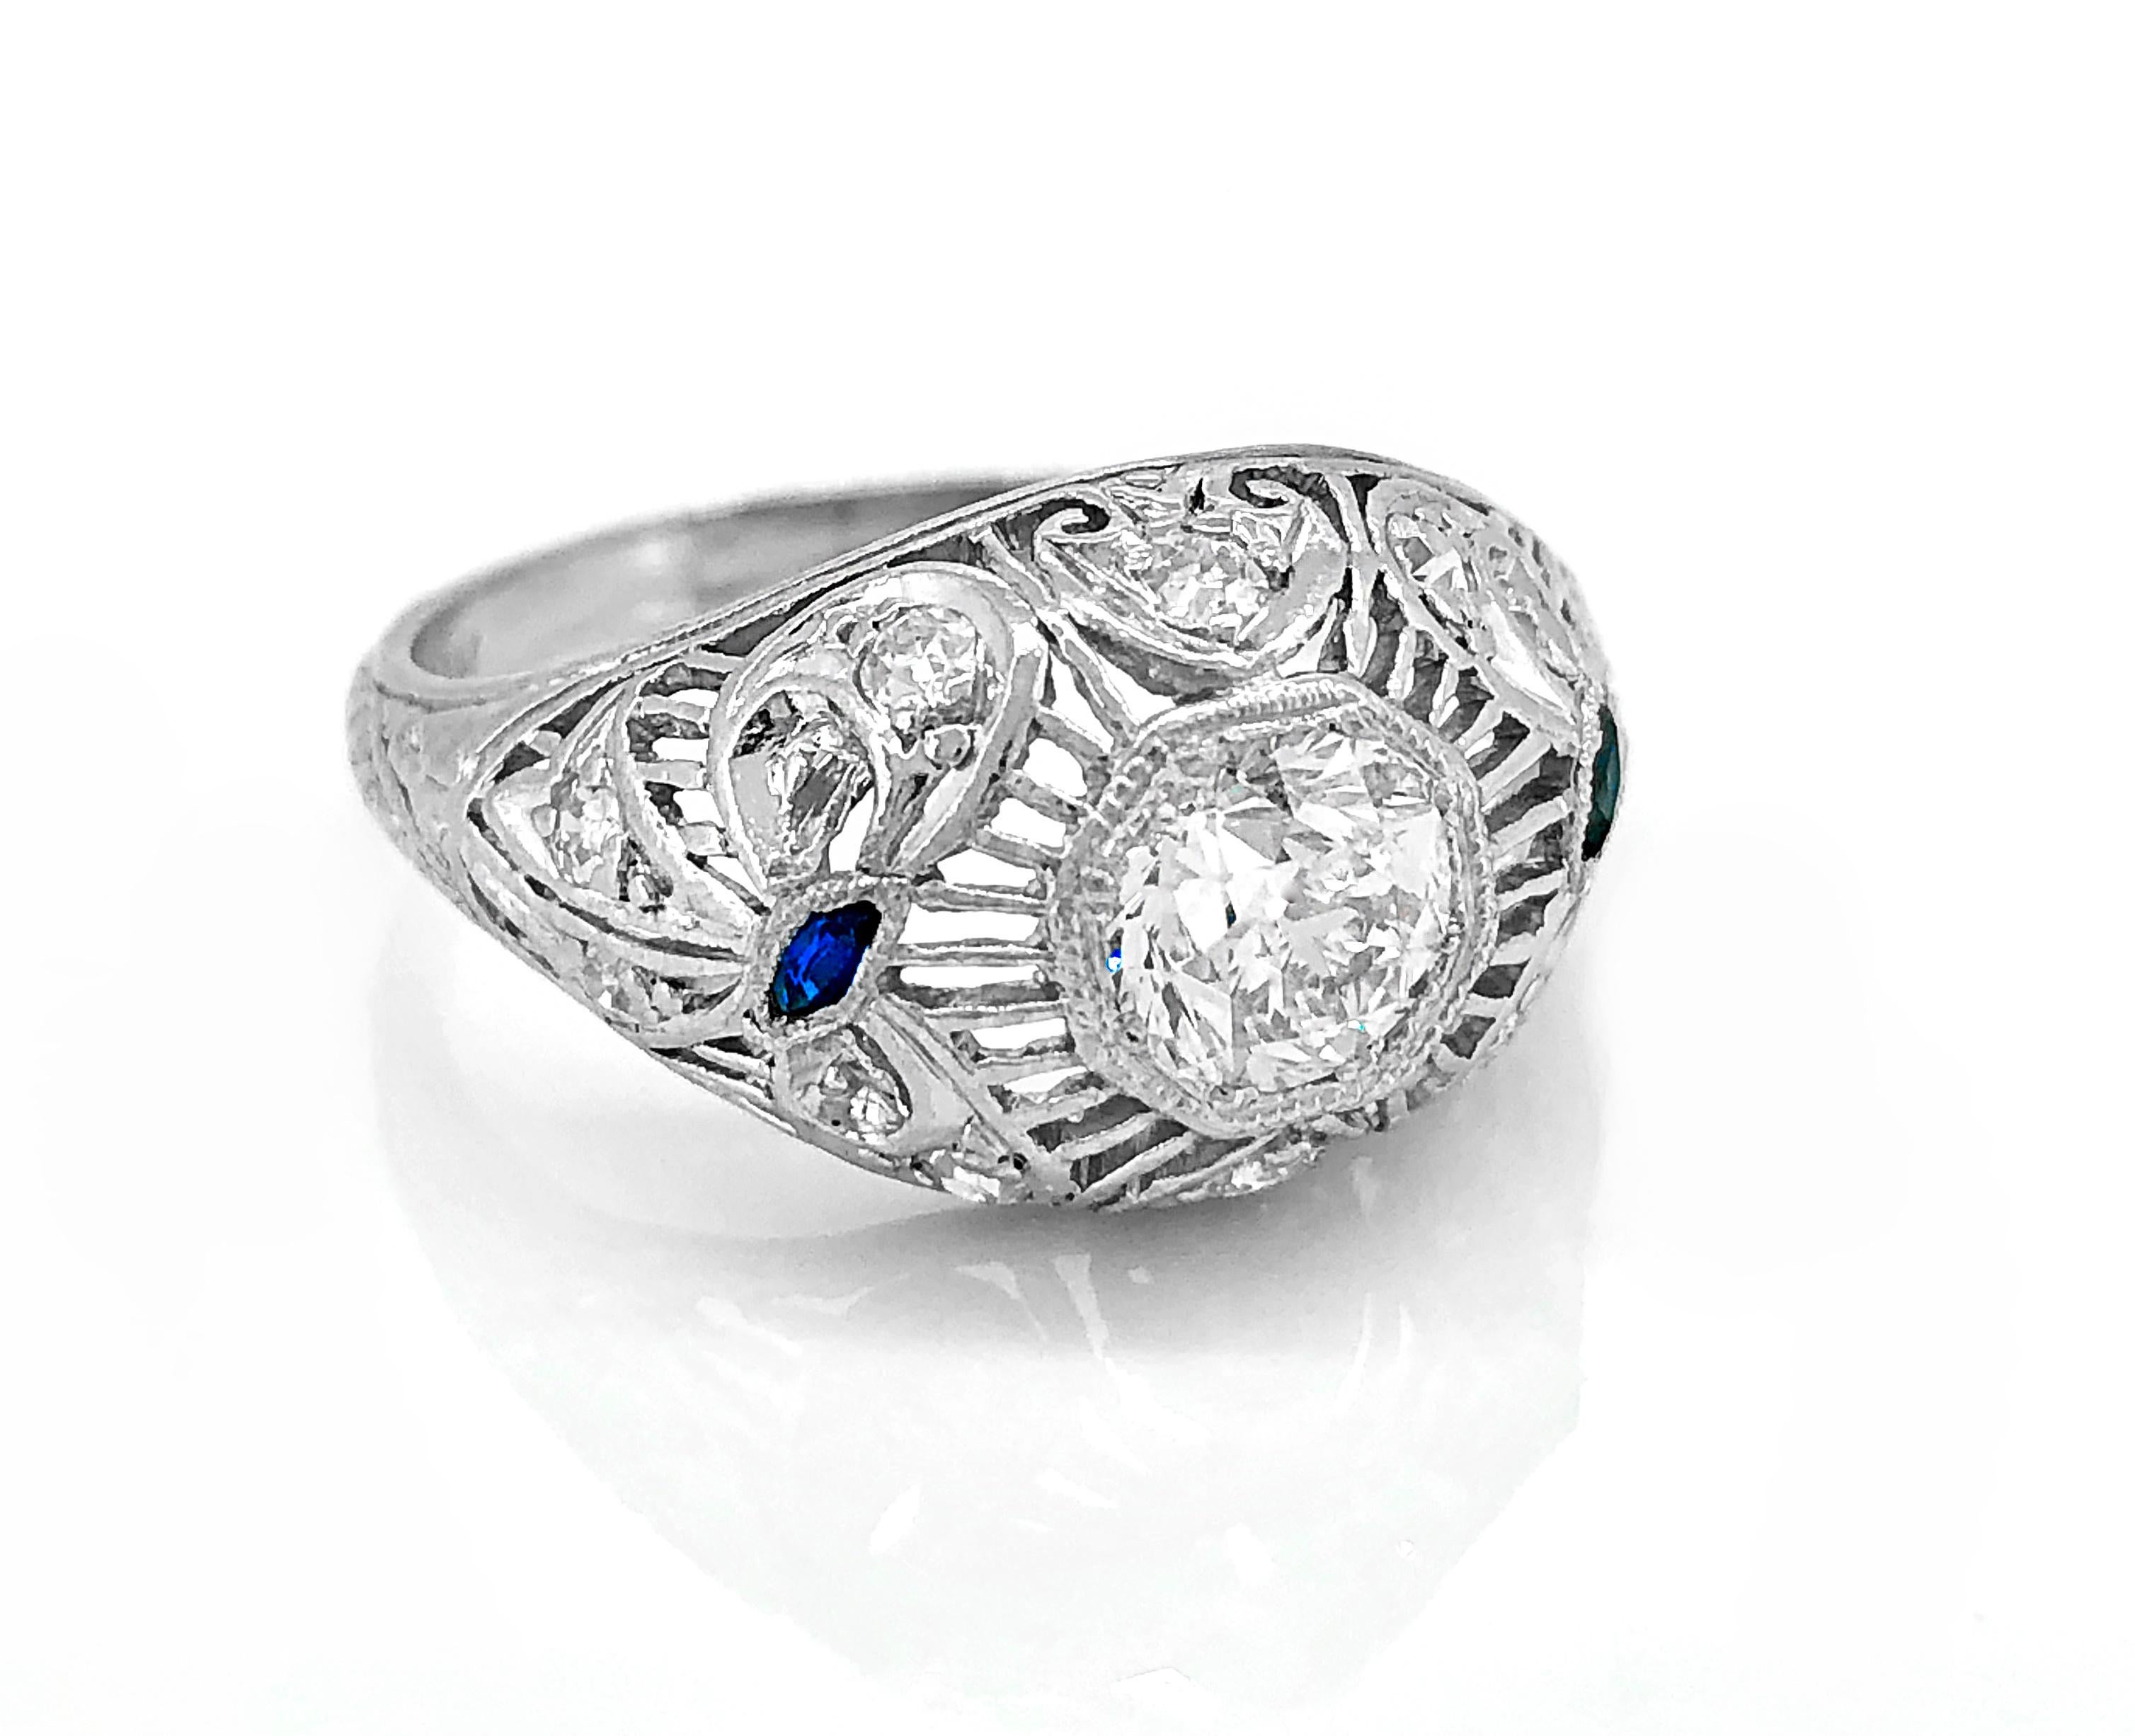 Tiny sapphires accent the shoulders of this absolutely gorgeous Belle Epoque/Edwardian platinum antique engagement ring! It is further enhanced by numerous small diamond melee and delicate engraving. The fiery .70ct. apx. VS2 clarity and I-J color